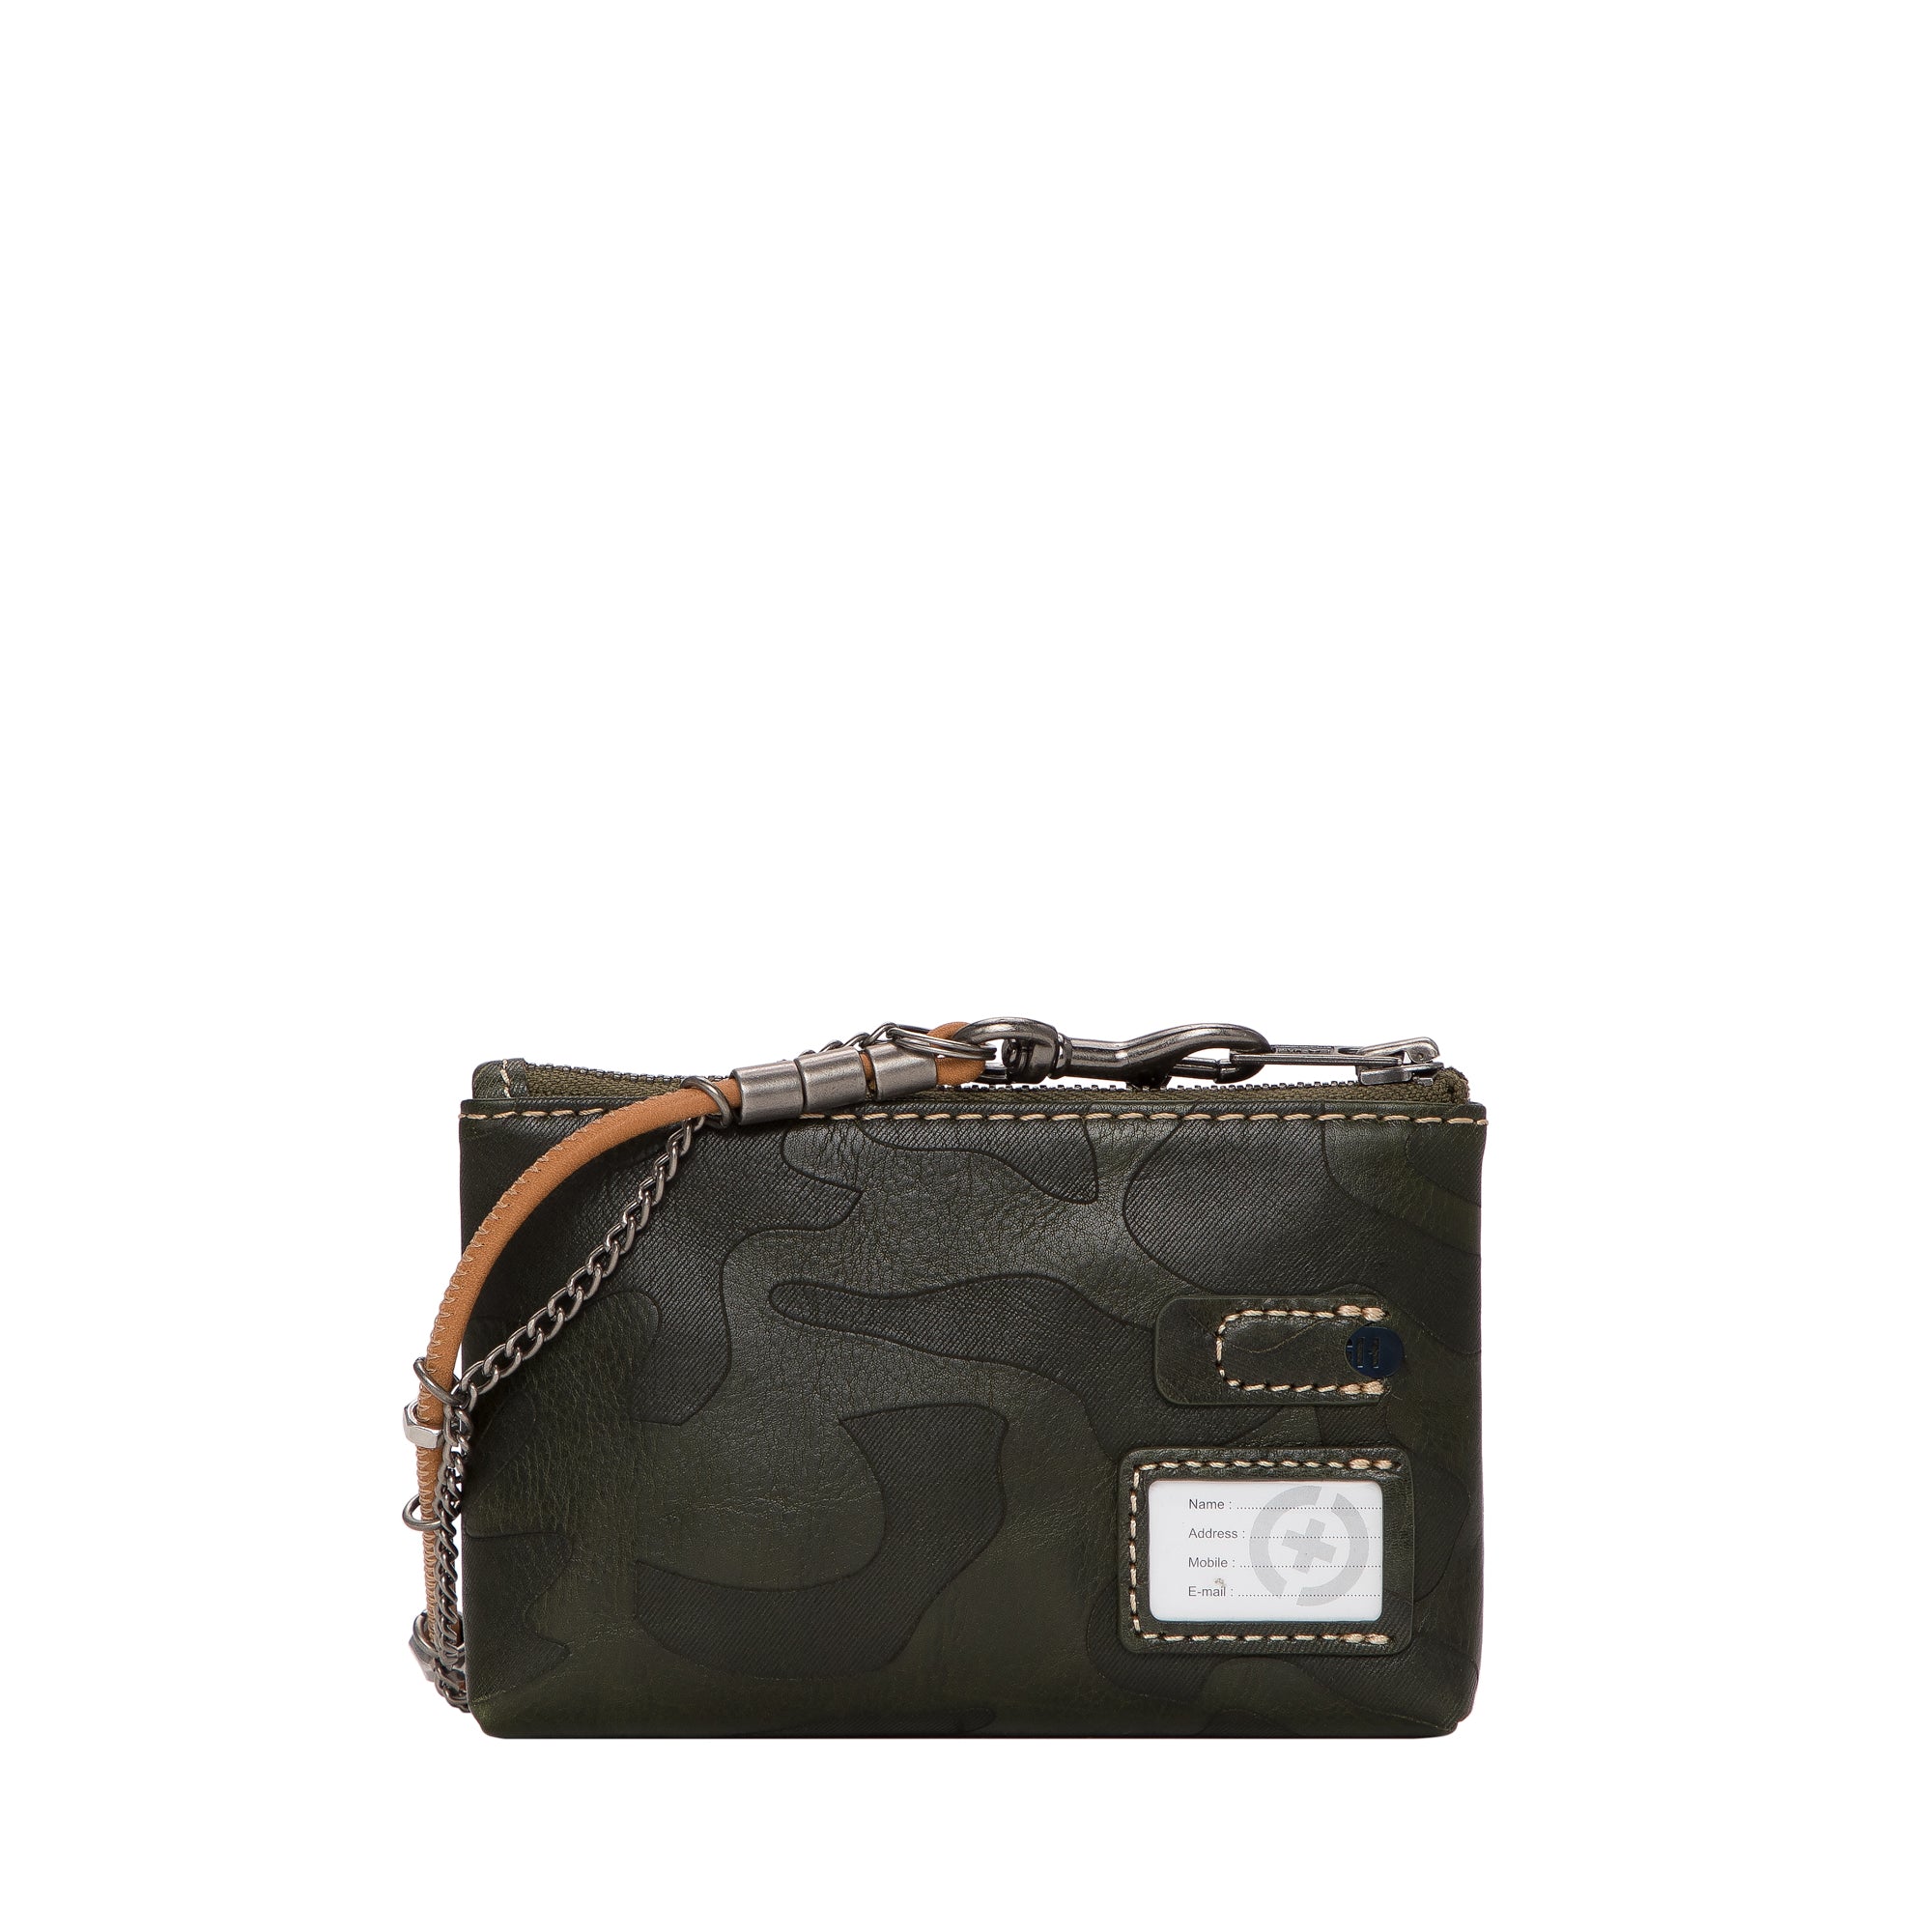 TOUGH JEANSMITH Troop Coin Purse #TW222-005